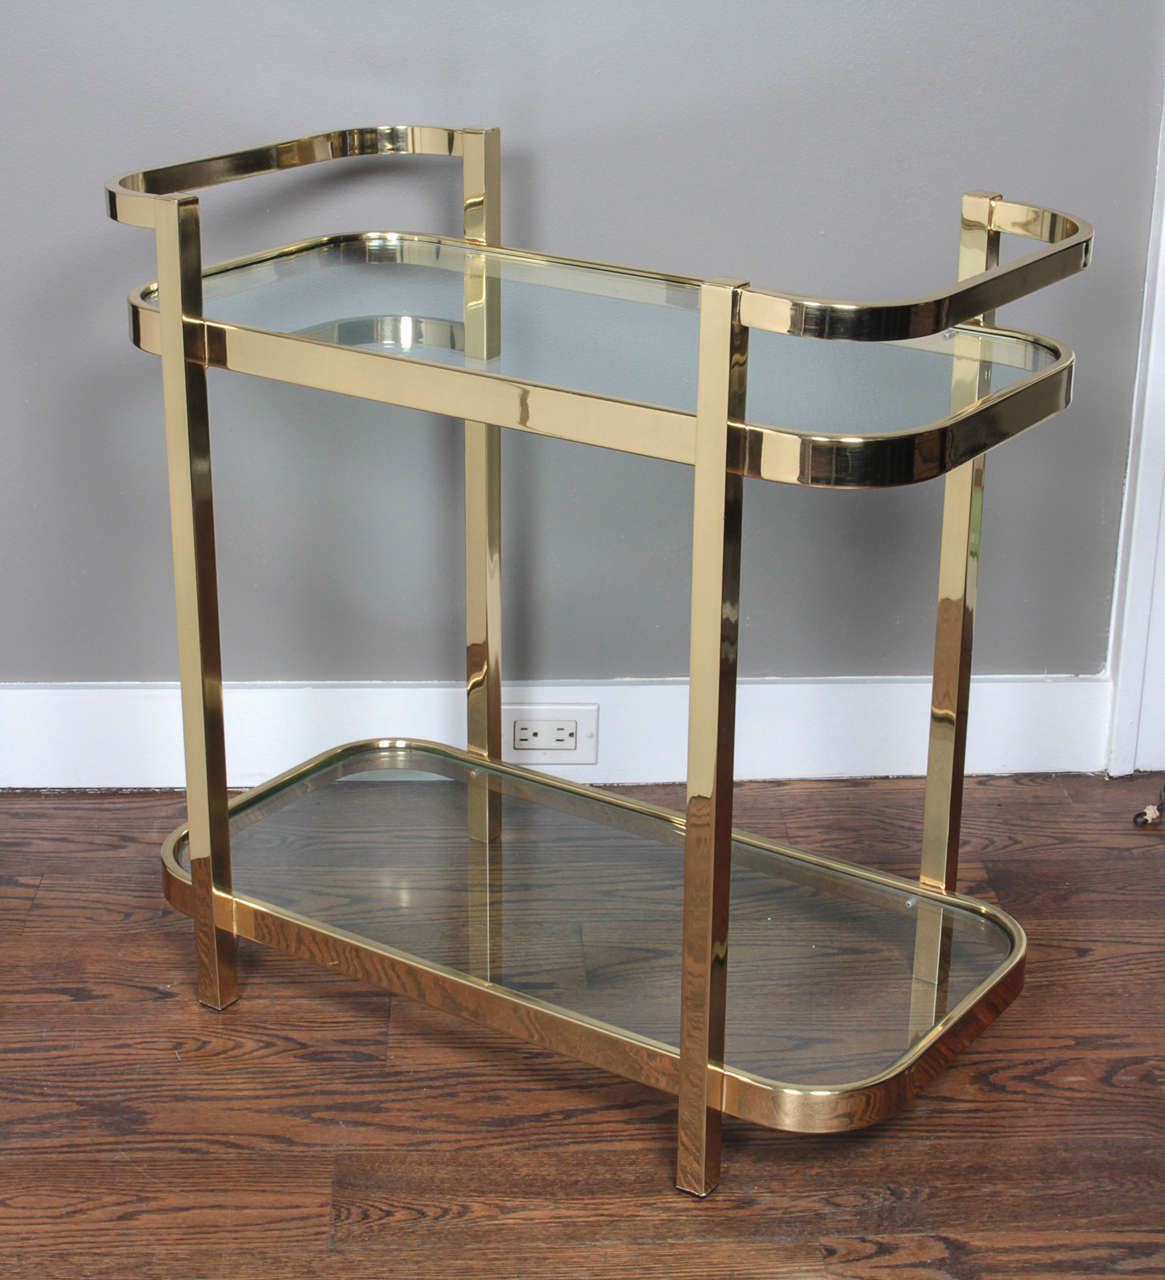 A beautiful bar cart by Milo Baughman for DIA (Design Institute of America) with 2 glass shelves.